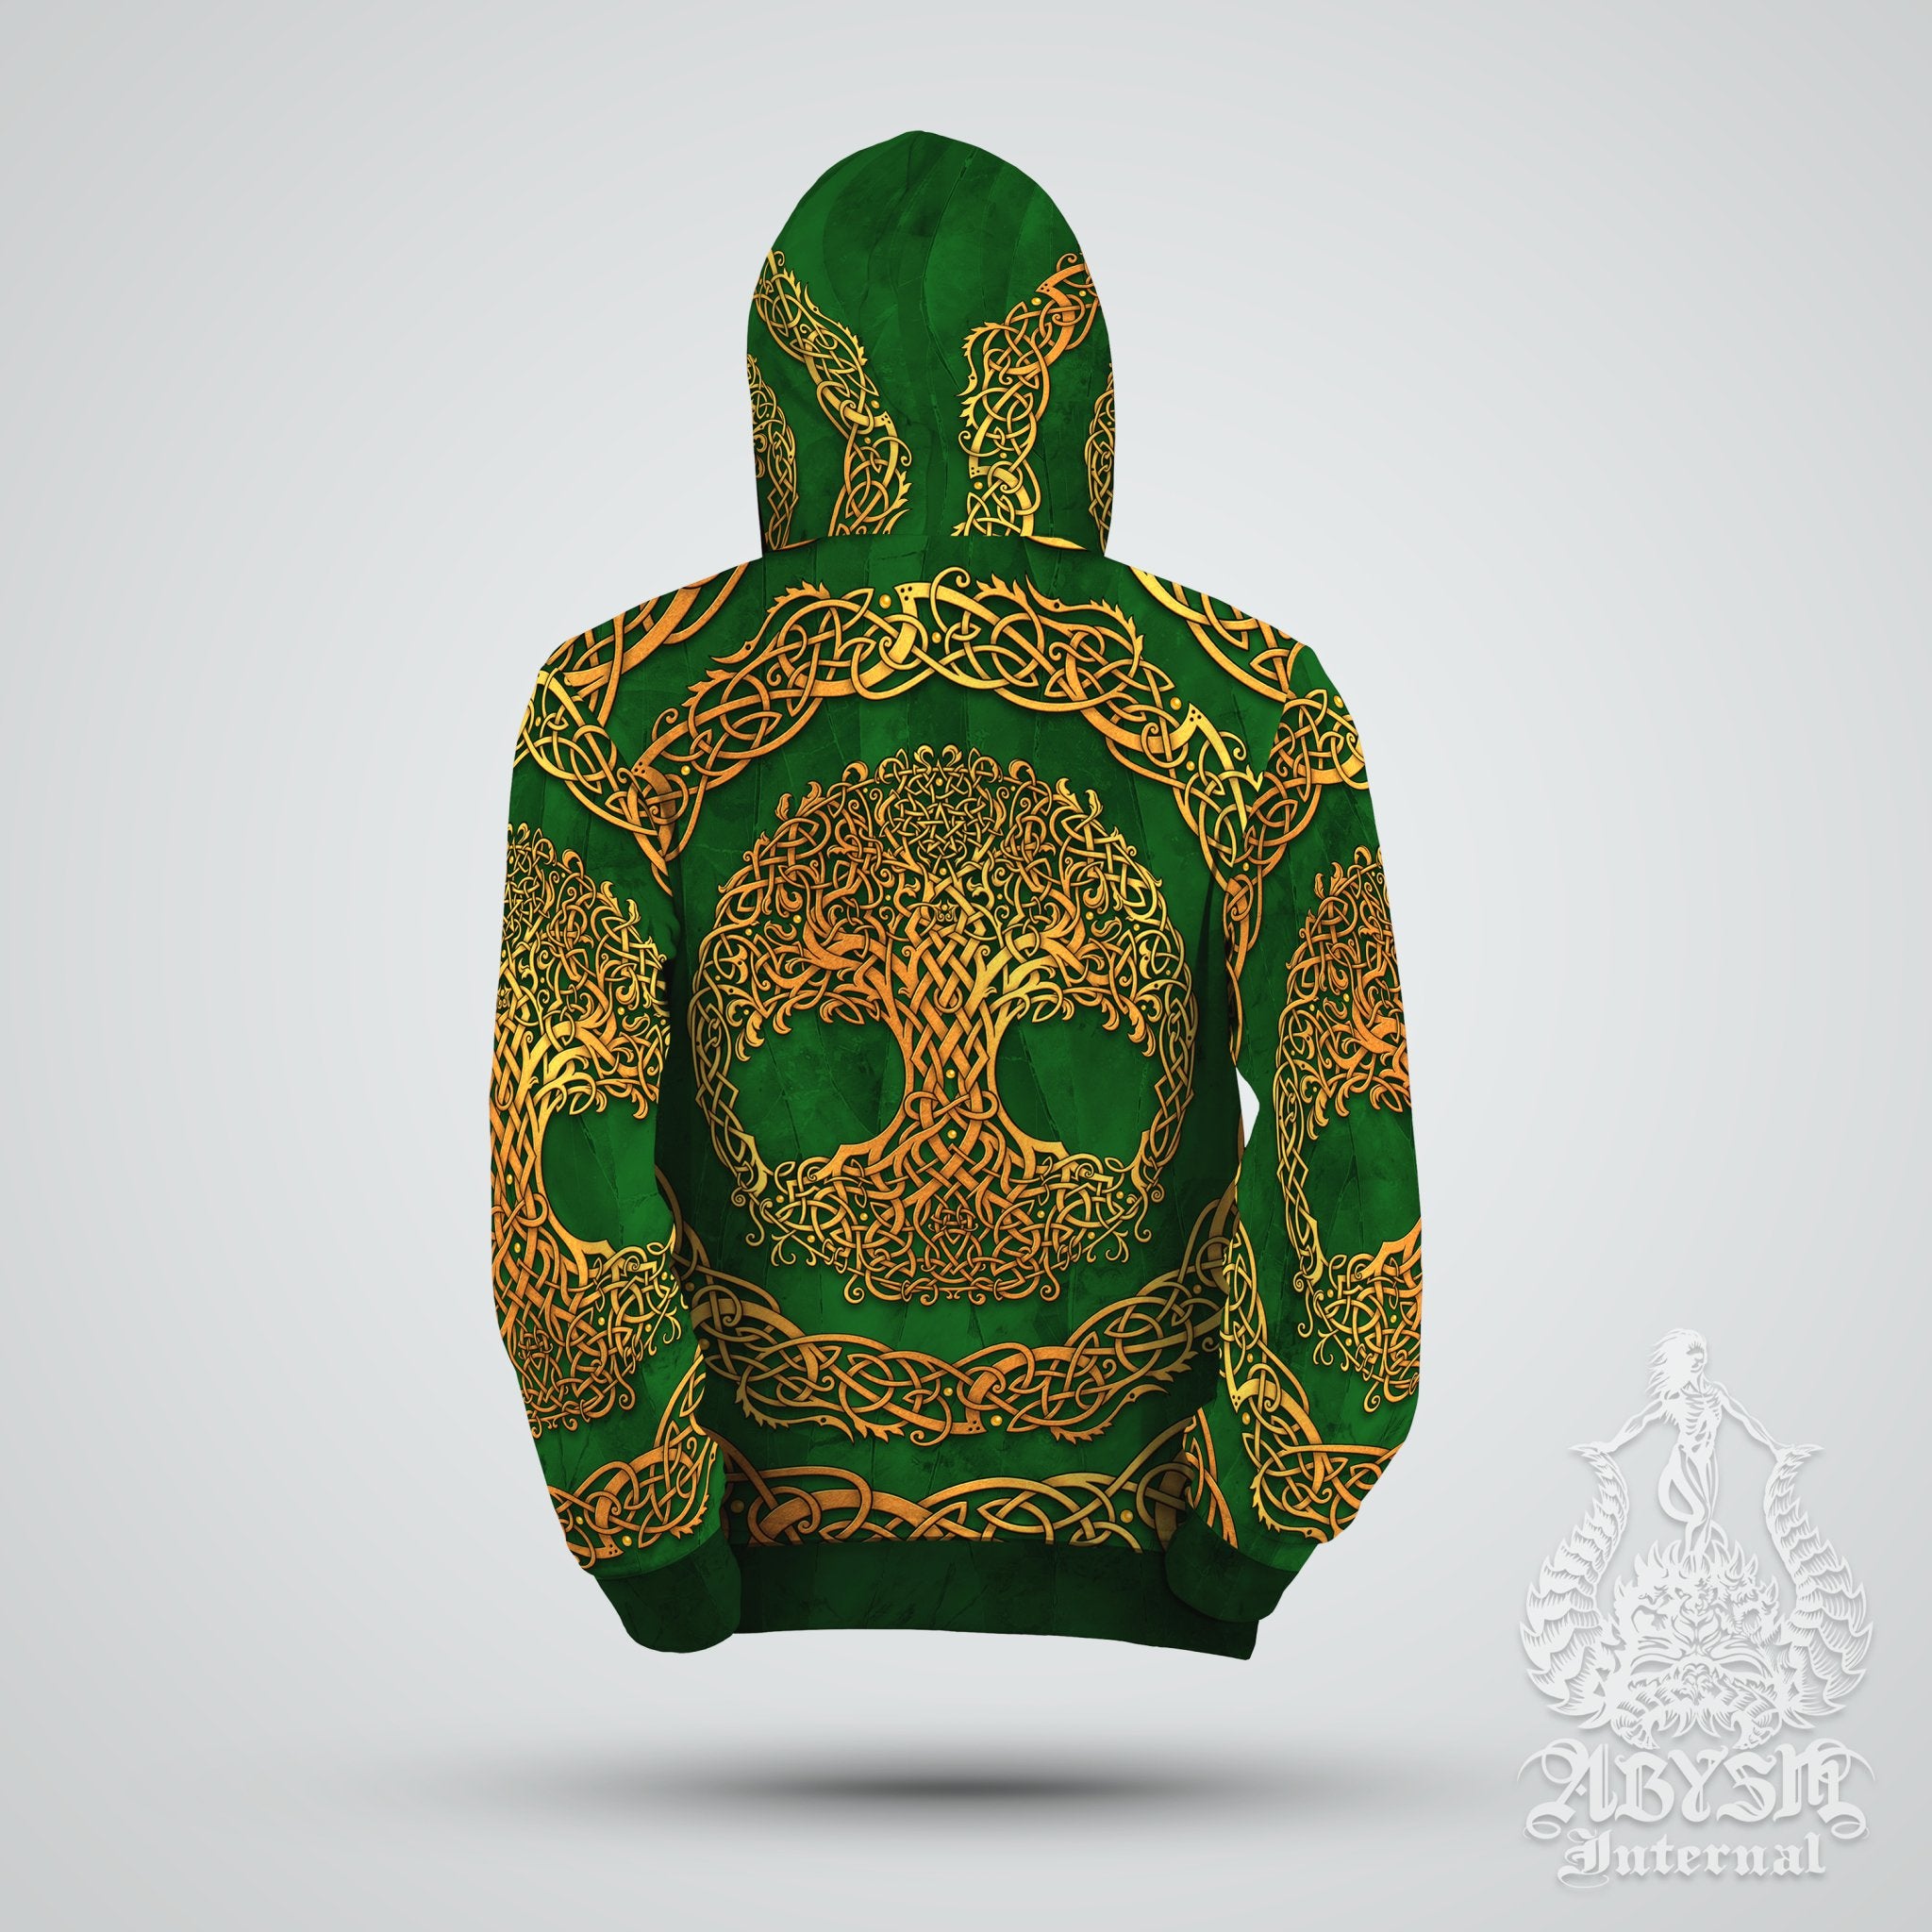 Gold Tree of Life Sweater, Indie Pullover, Boho Outfit, Witchy Hoodie, Celtic Streetwear, Alternative Clothing, Unisex - Black, Green or Purple, 3 Colors - Abysm Internal